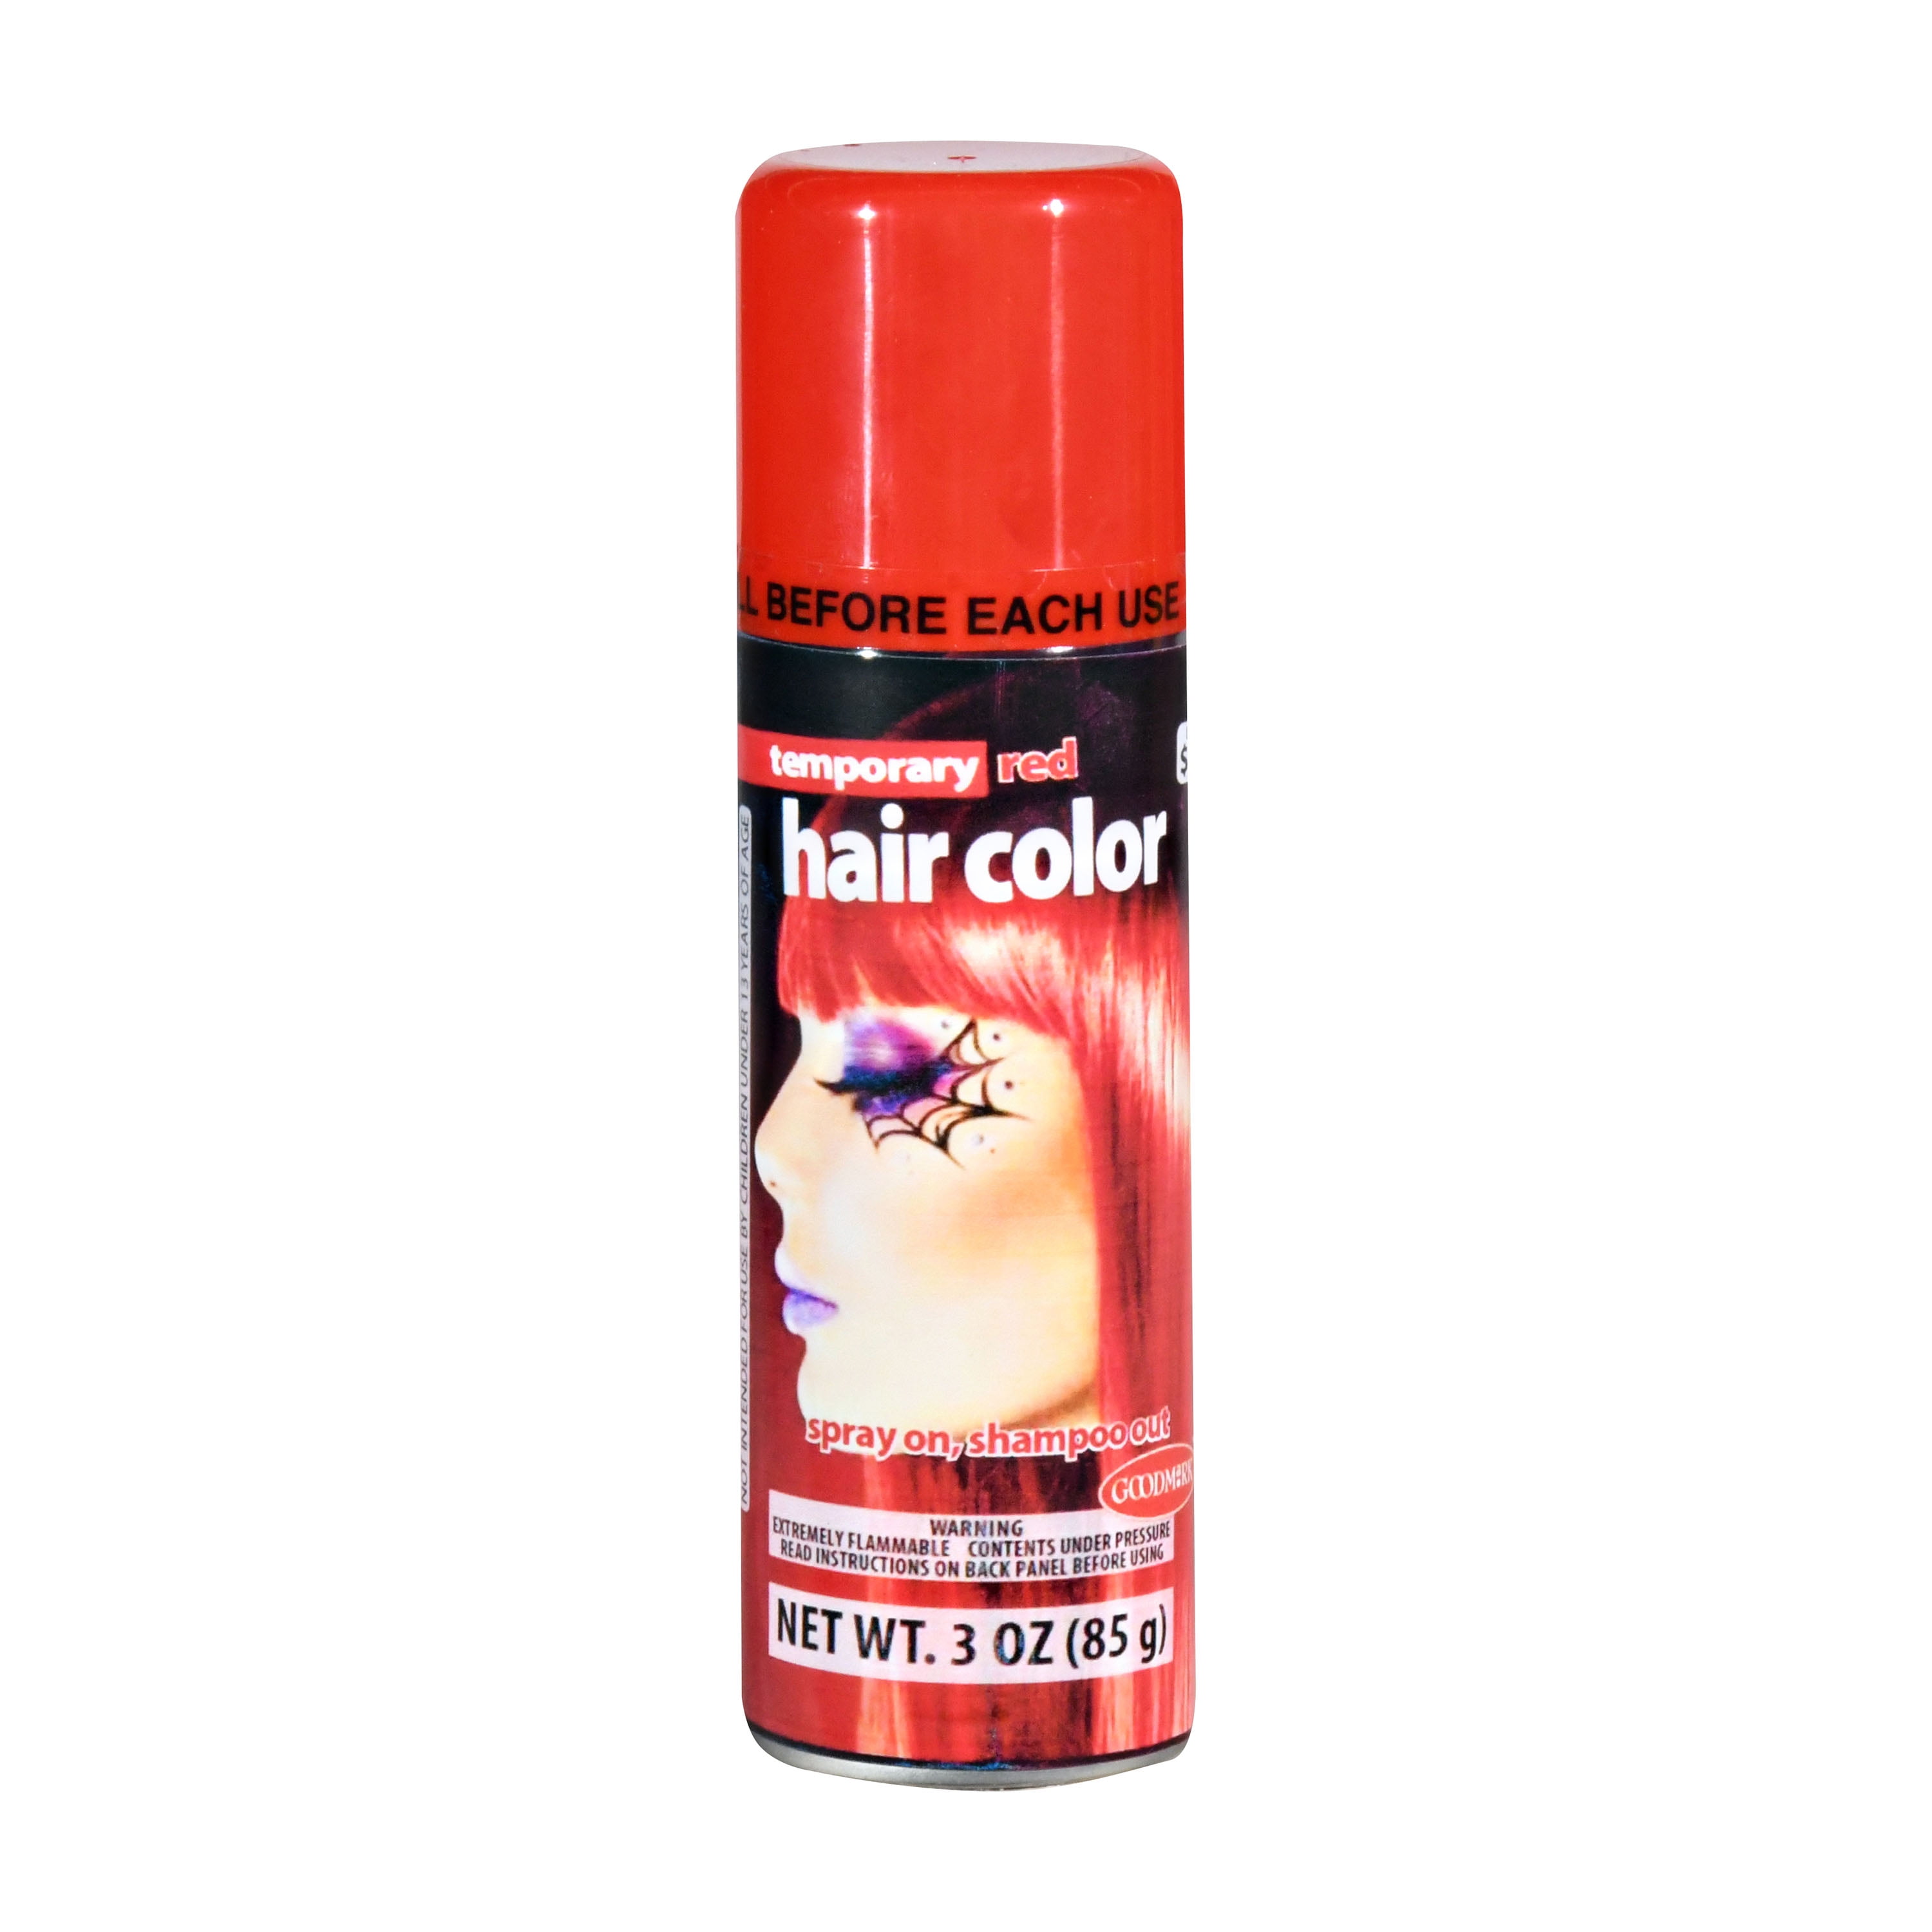 Goodmark Halloween Temporary Hair Color Spray, Net Wt. 3oz (85g) is perfect  when you want to create a fun new look. Choose from a variety of colors ( colors sold separately). Hair Color